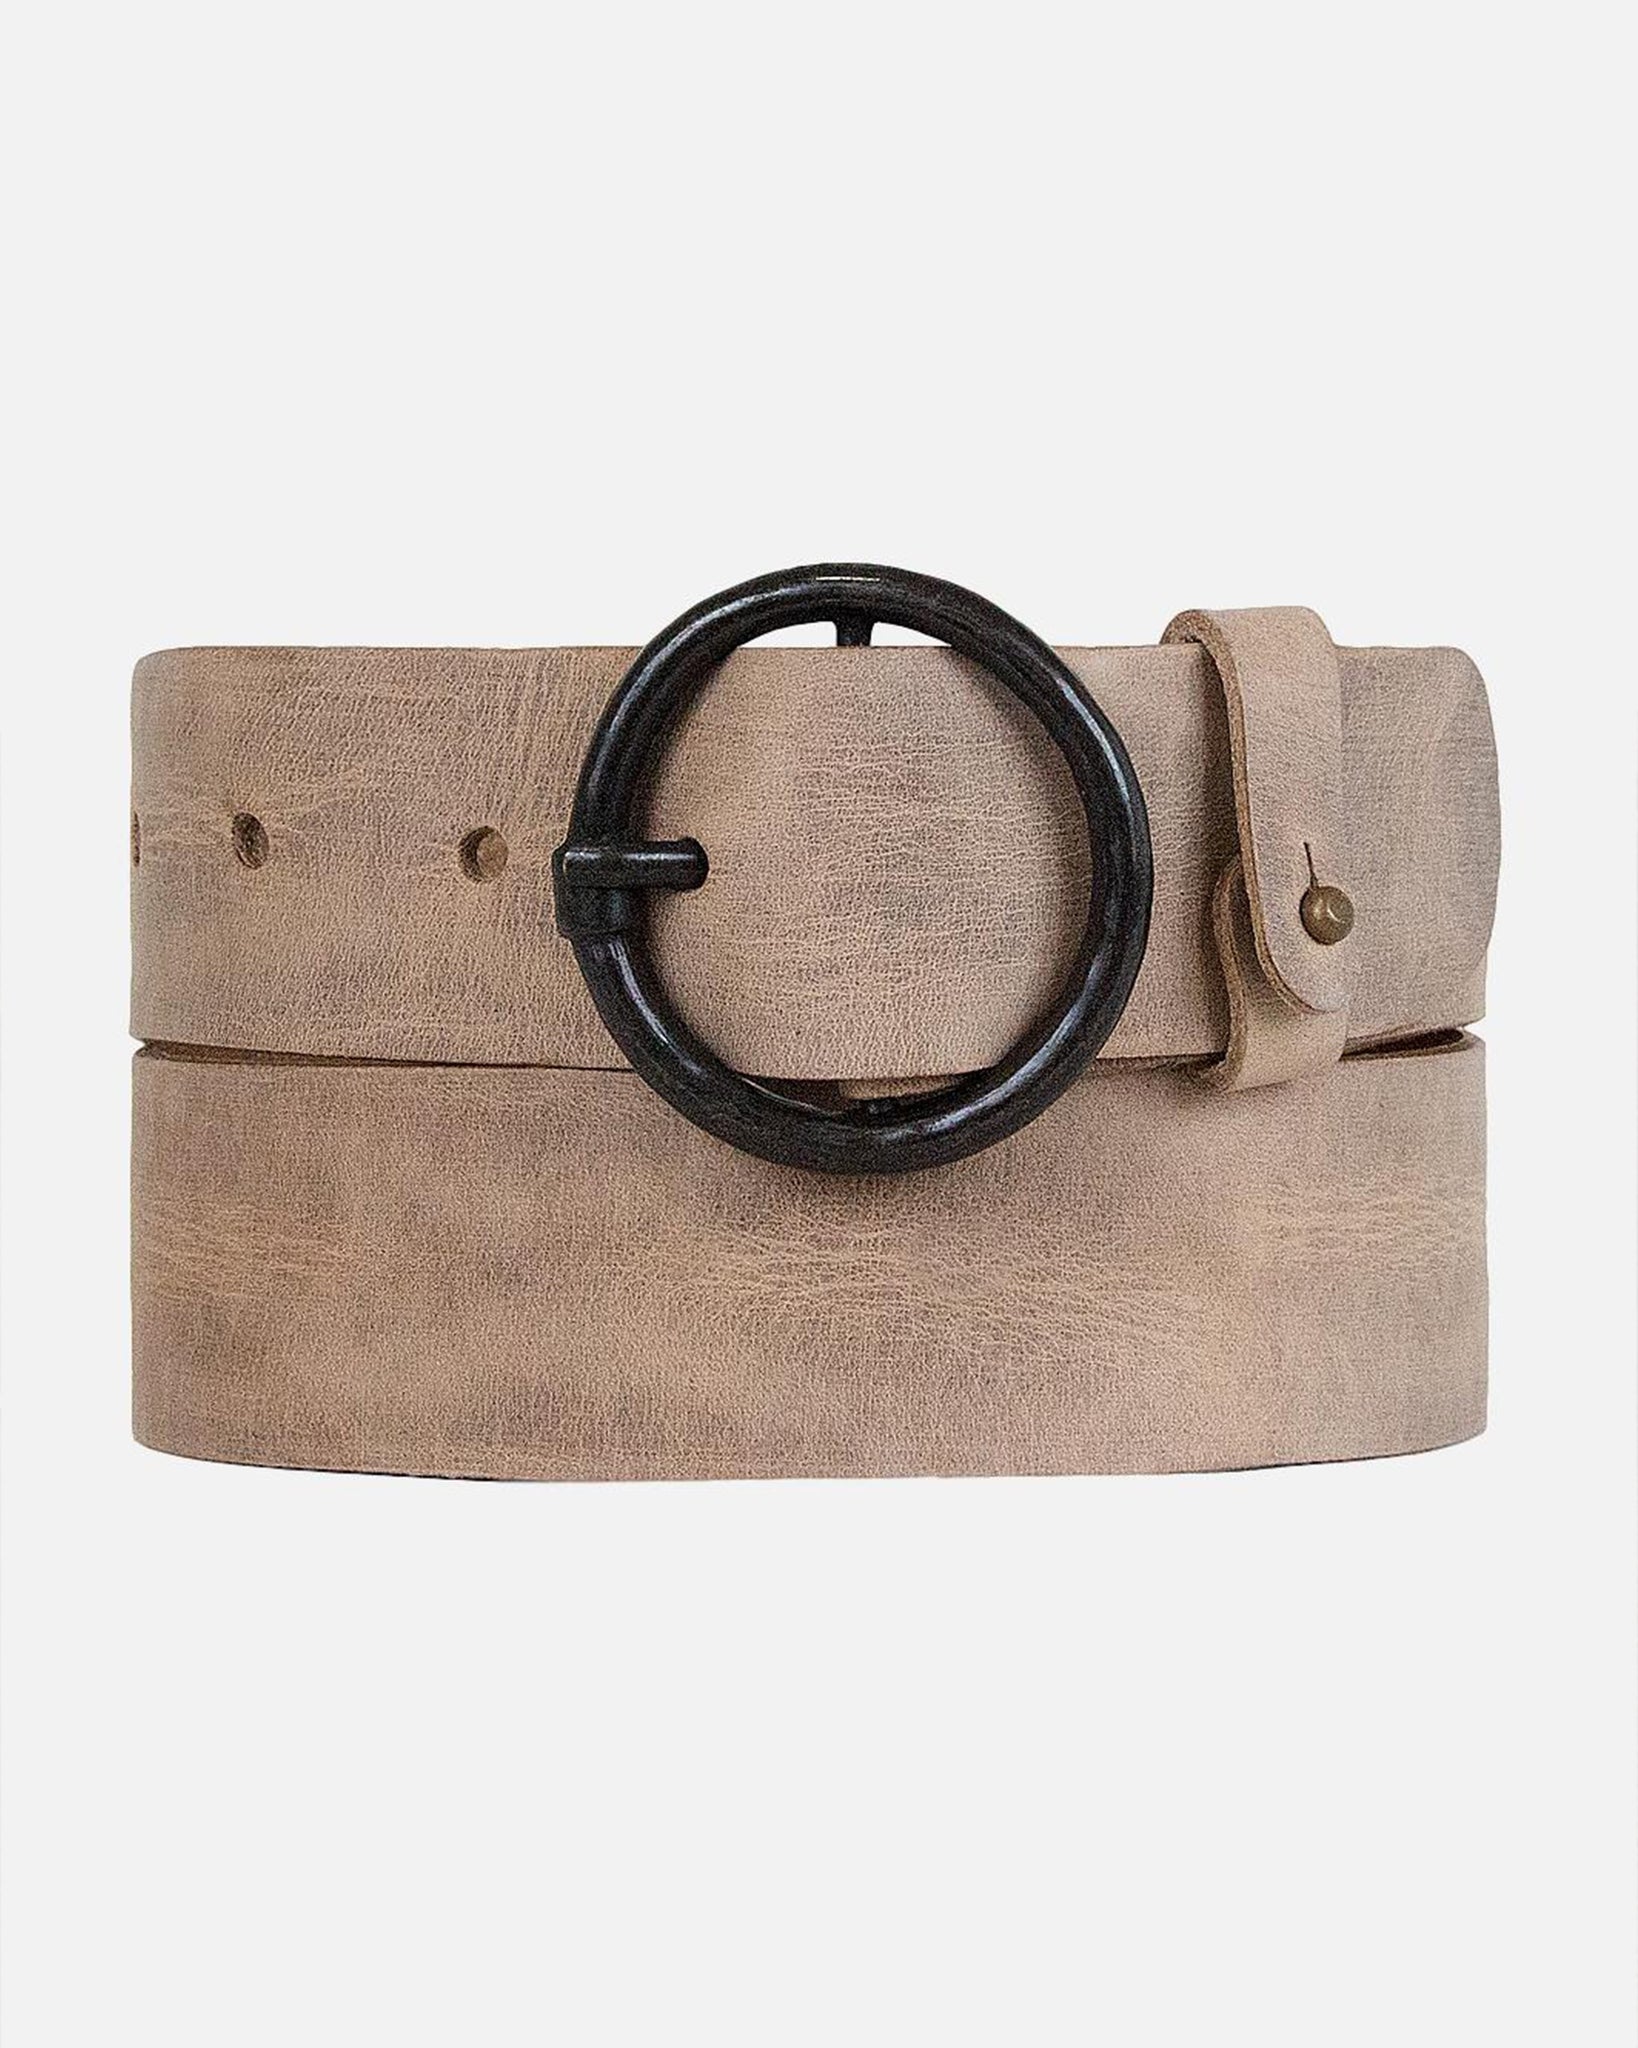 Womens brown leather belt with a round buckle -Amsterdam Heritage ...